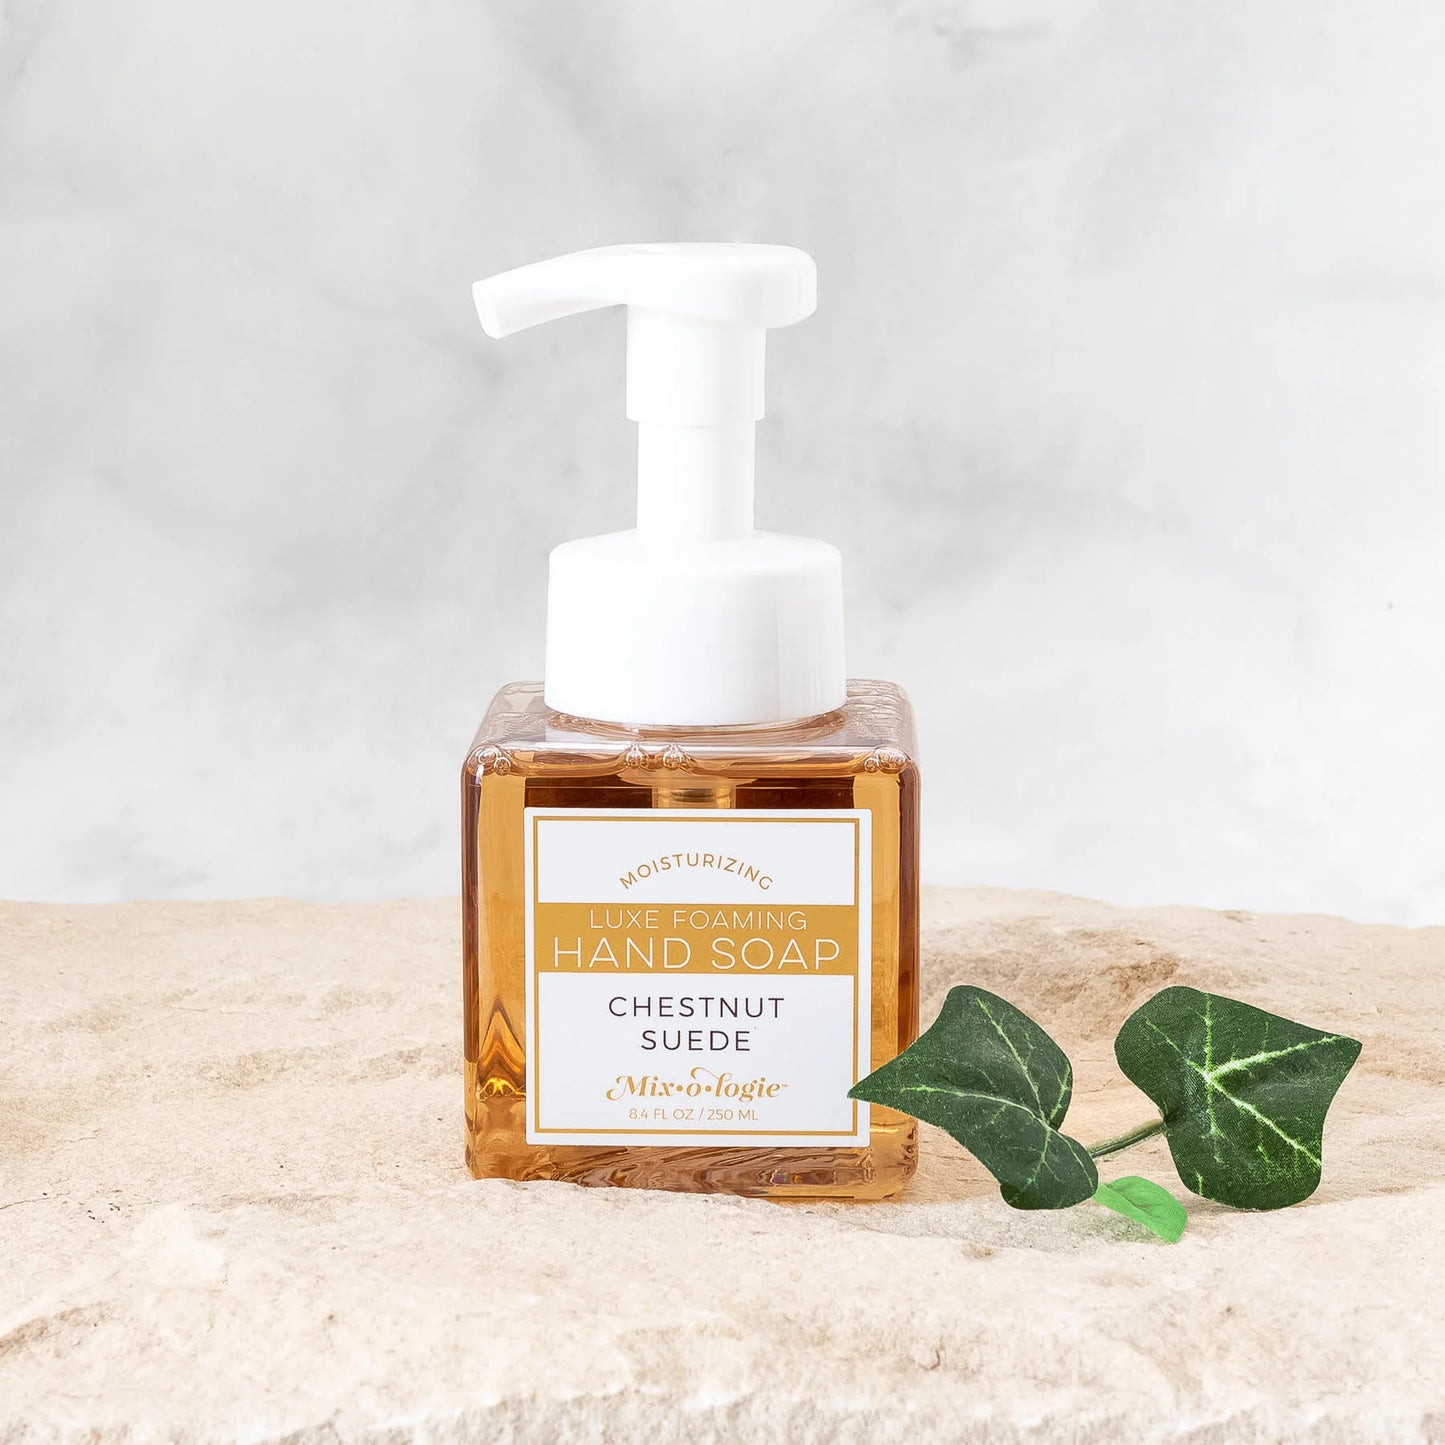 Chestnut Suede Luxe Foaming Hand Soap